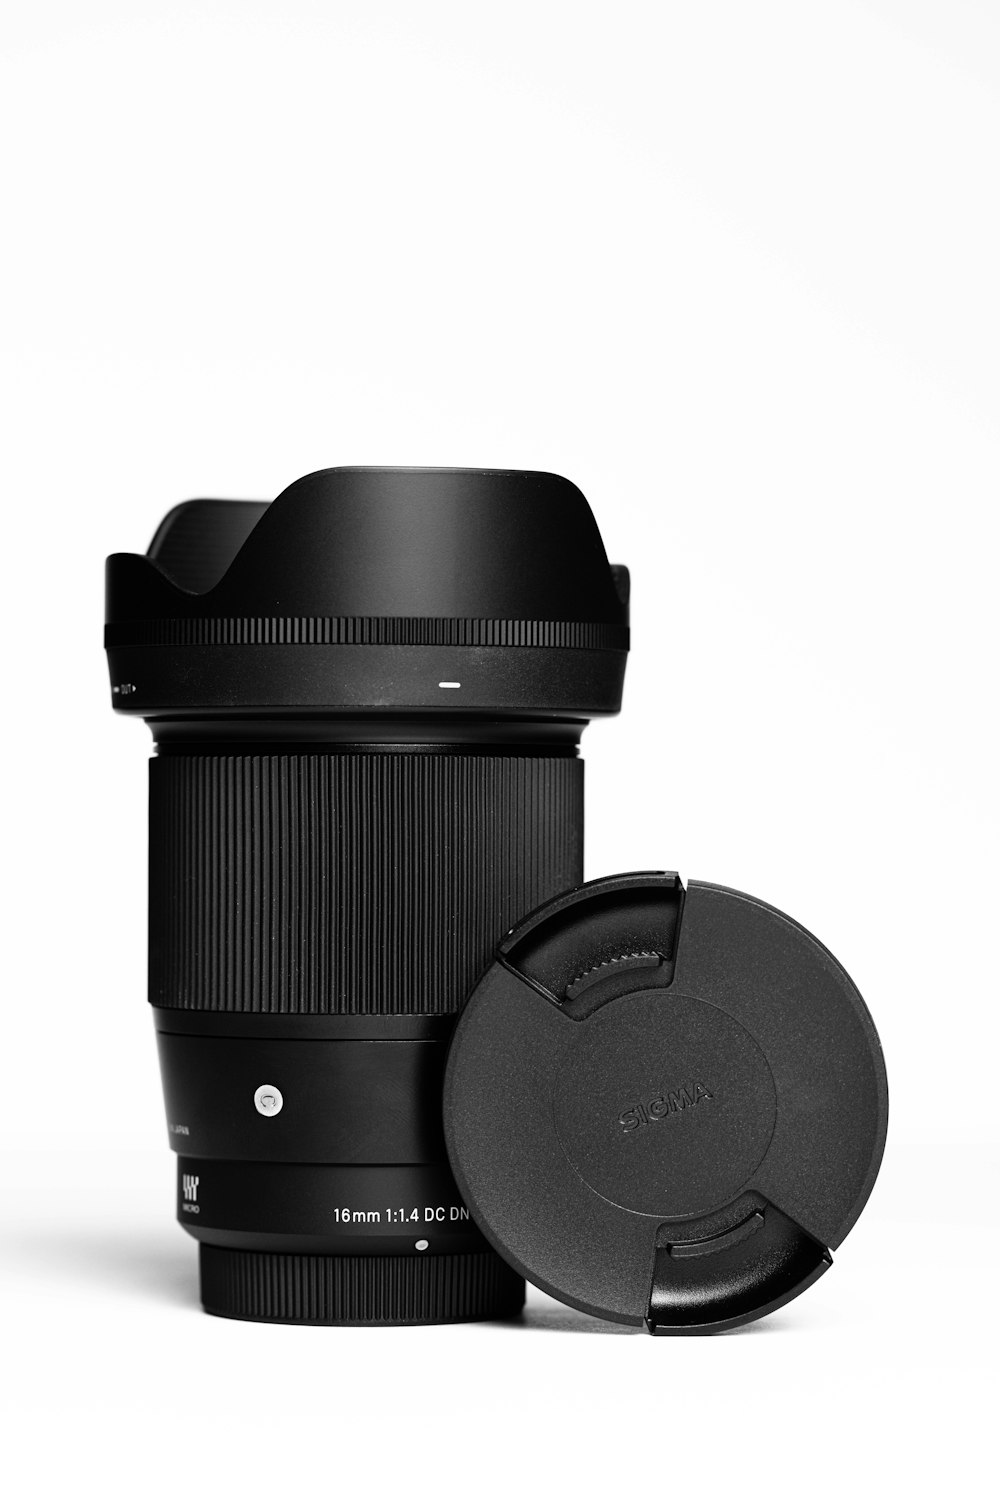 a camera lens with a lens cap next to it